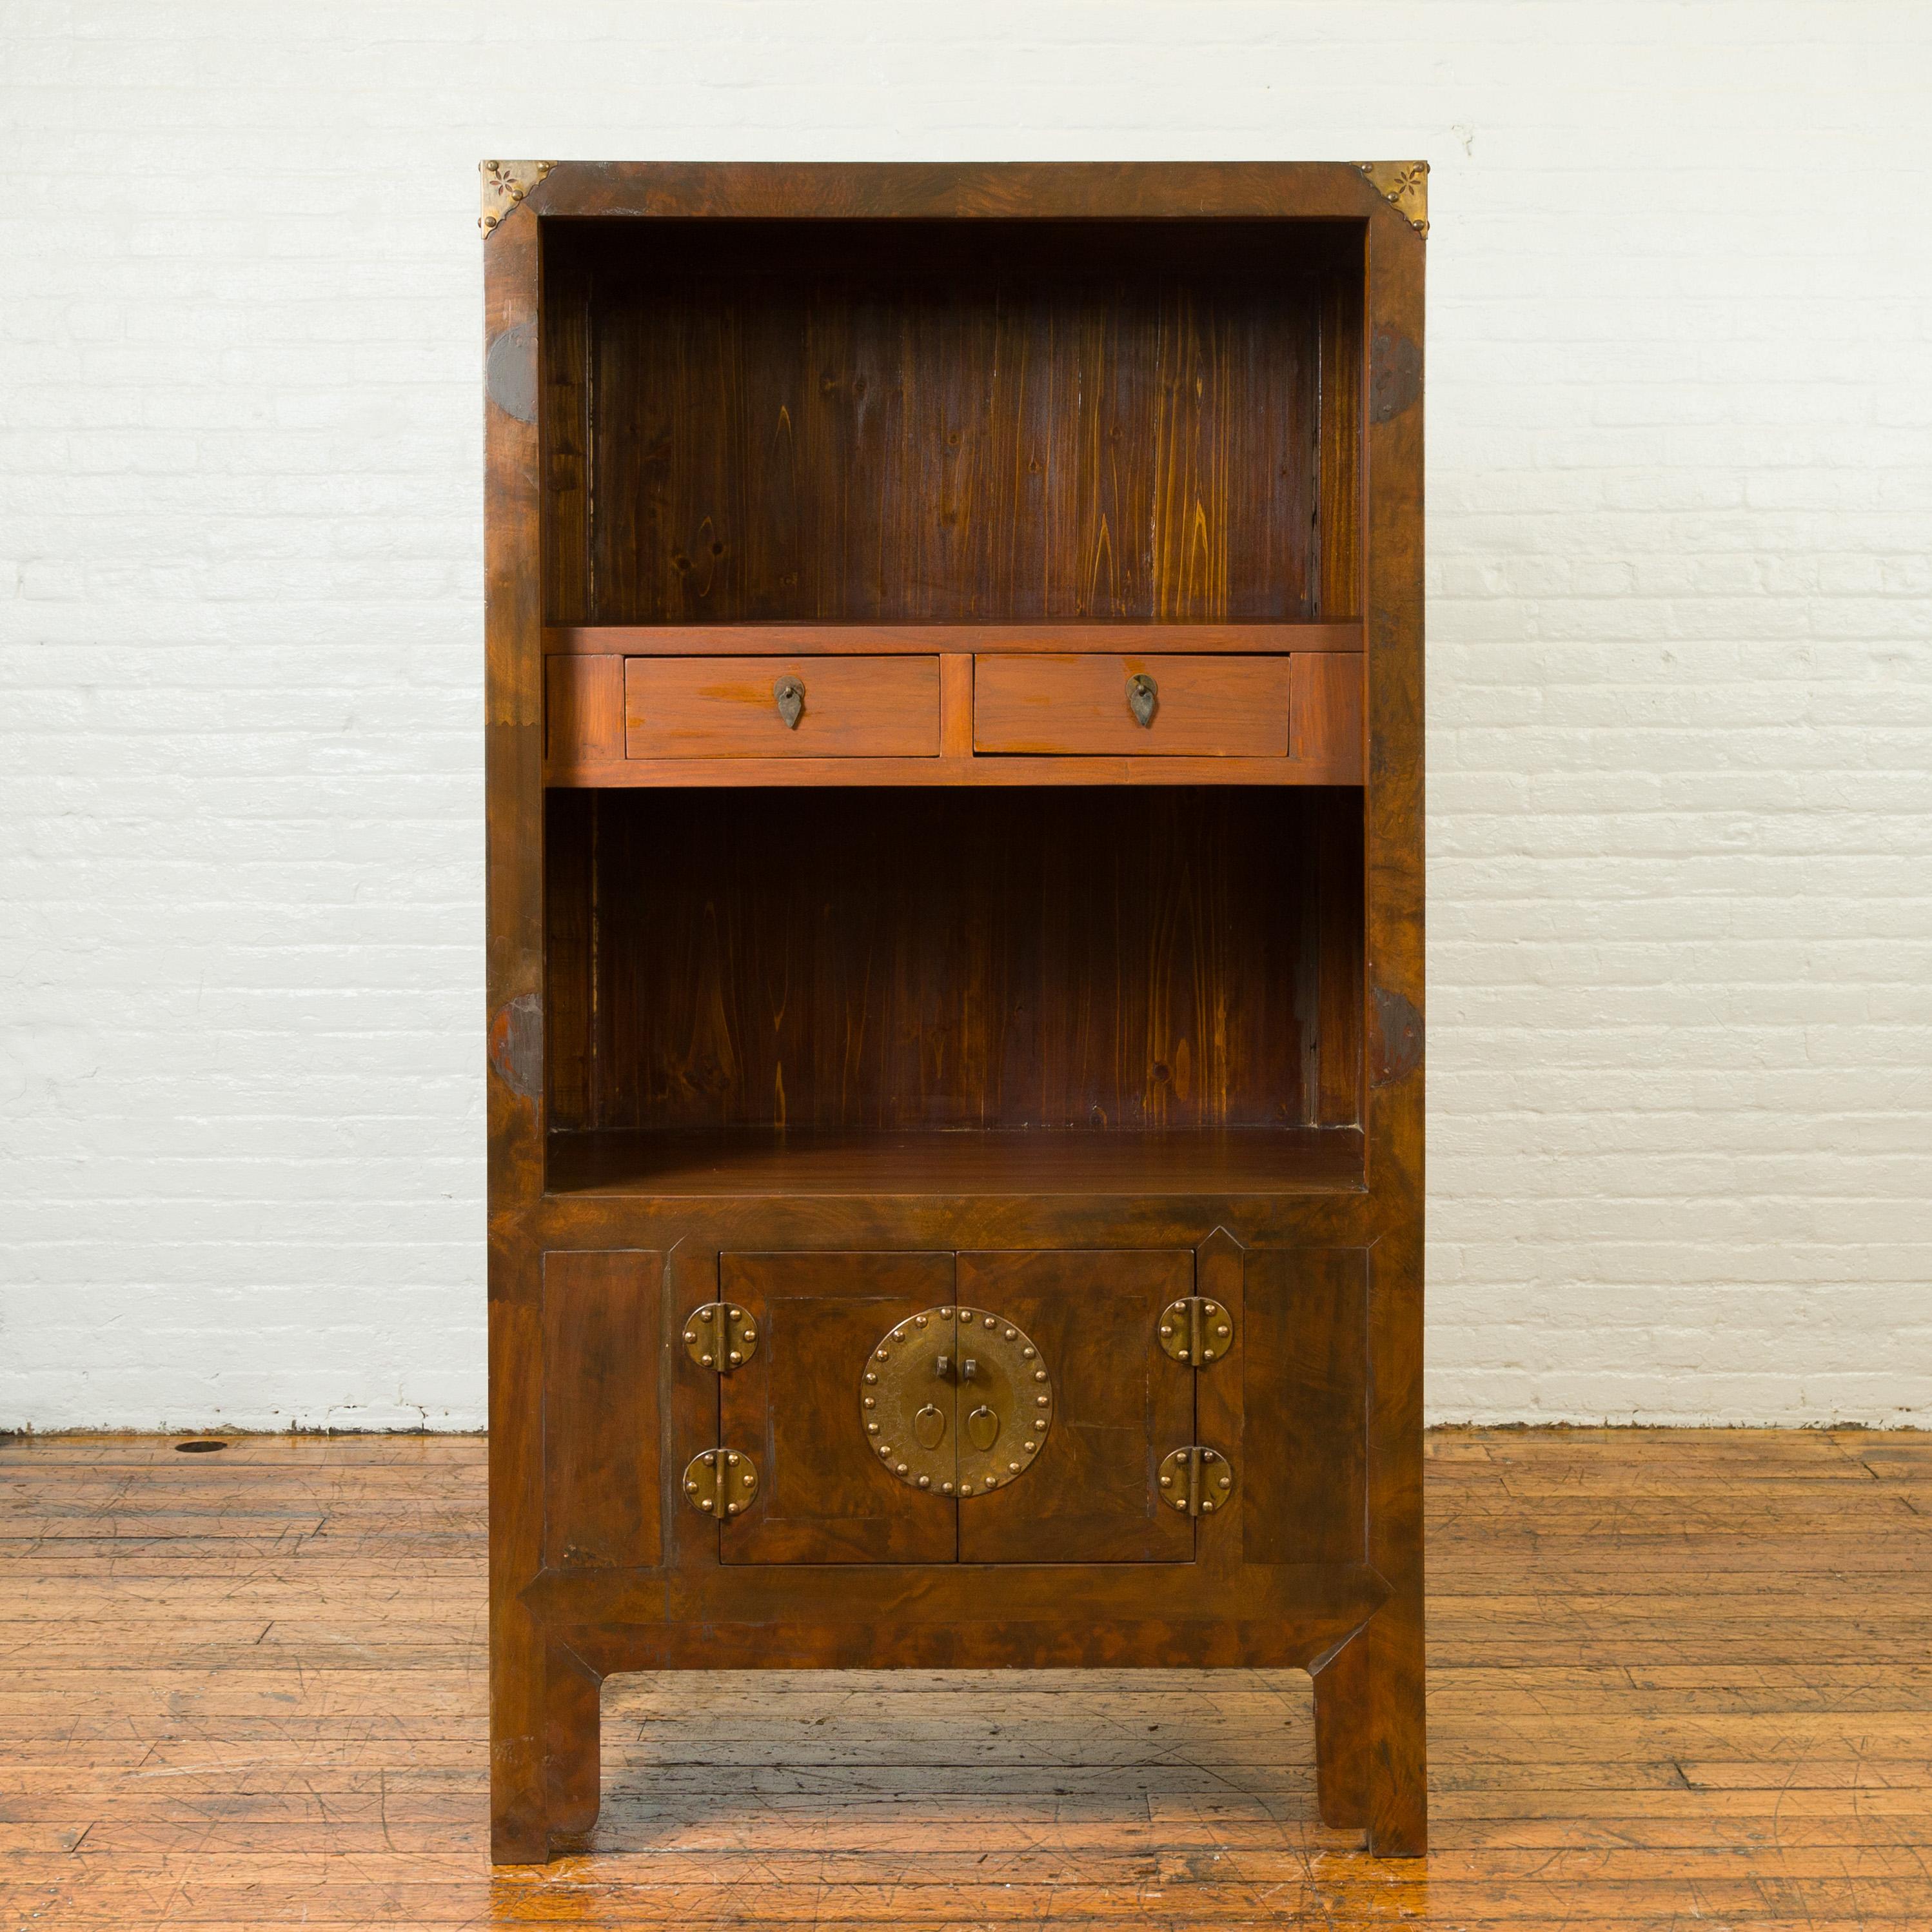 A Chinese antique elmwood bookcase cabinet from the 19th century, with two drawers, two doors and brass accents. Crafted in China from elm wood, this bookcase captures our eyes with its linear silhouette and subtly contrasting colors. The upper